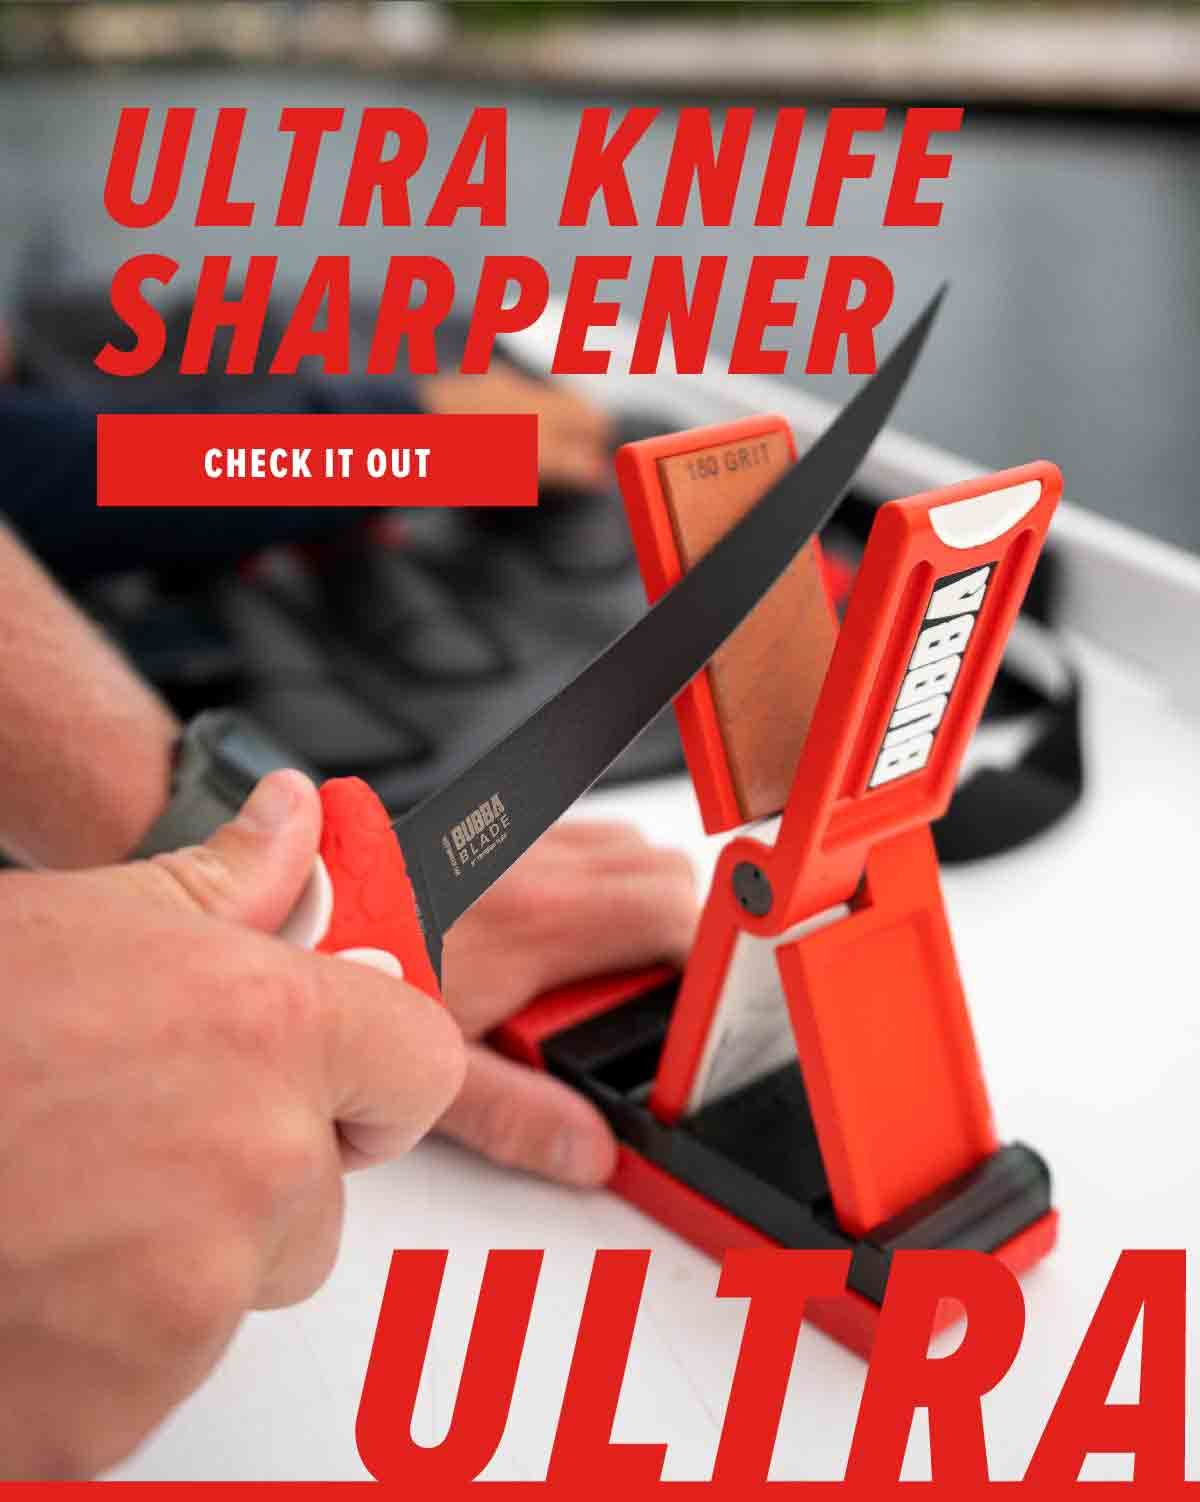 Bubba Blade: Introducing the Ultra Knife Sharpener!